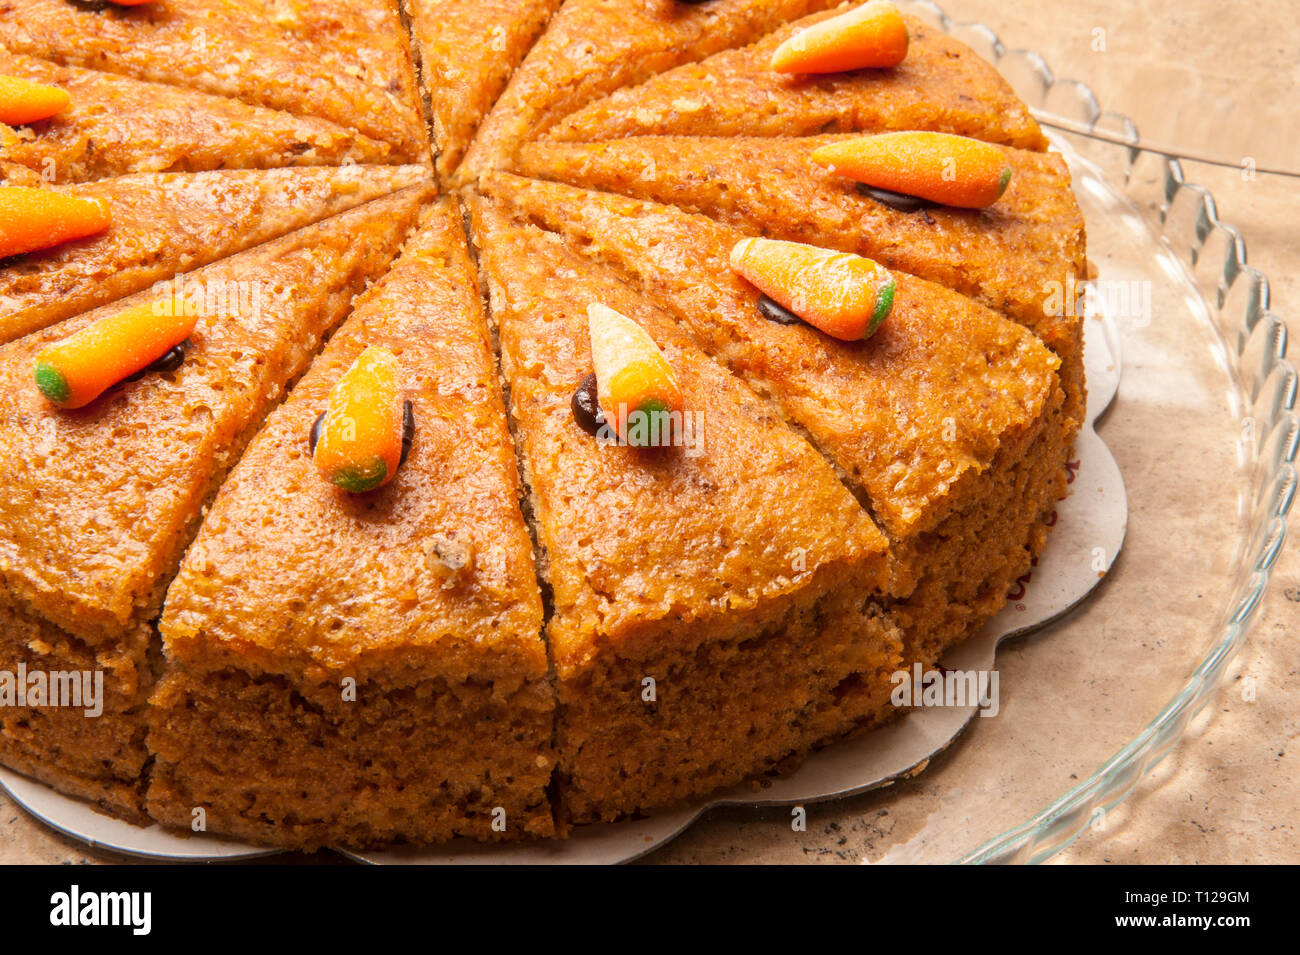 Carrot cake ready to be served. Triangle-sliced carrot cake is the favorite dessert of people especially those who are fond of taste. Stock Photo